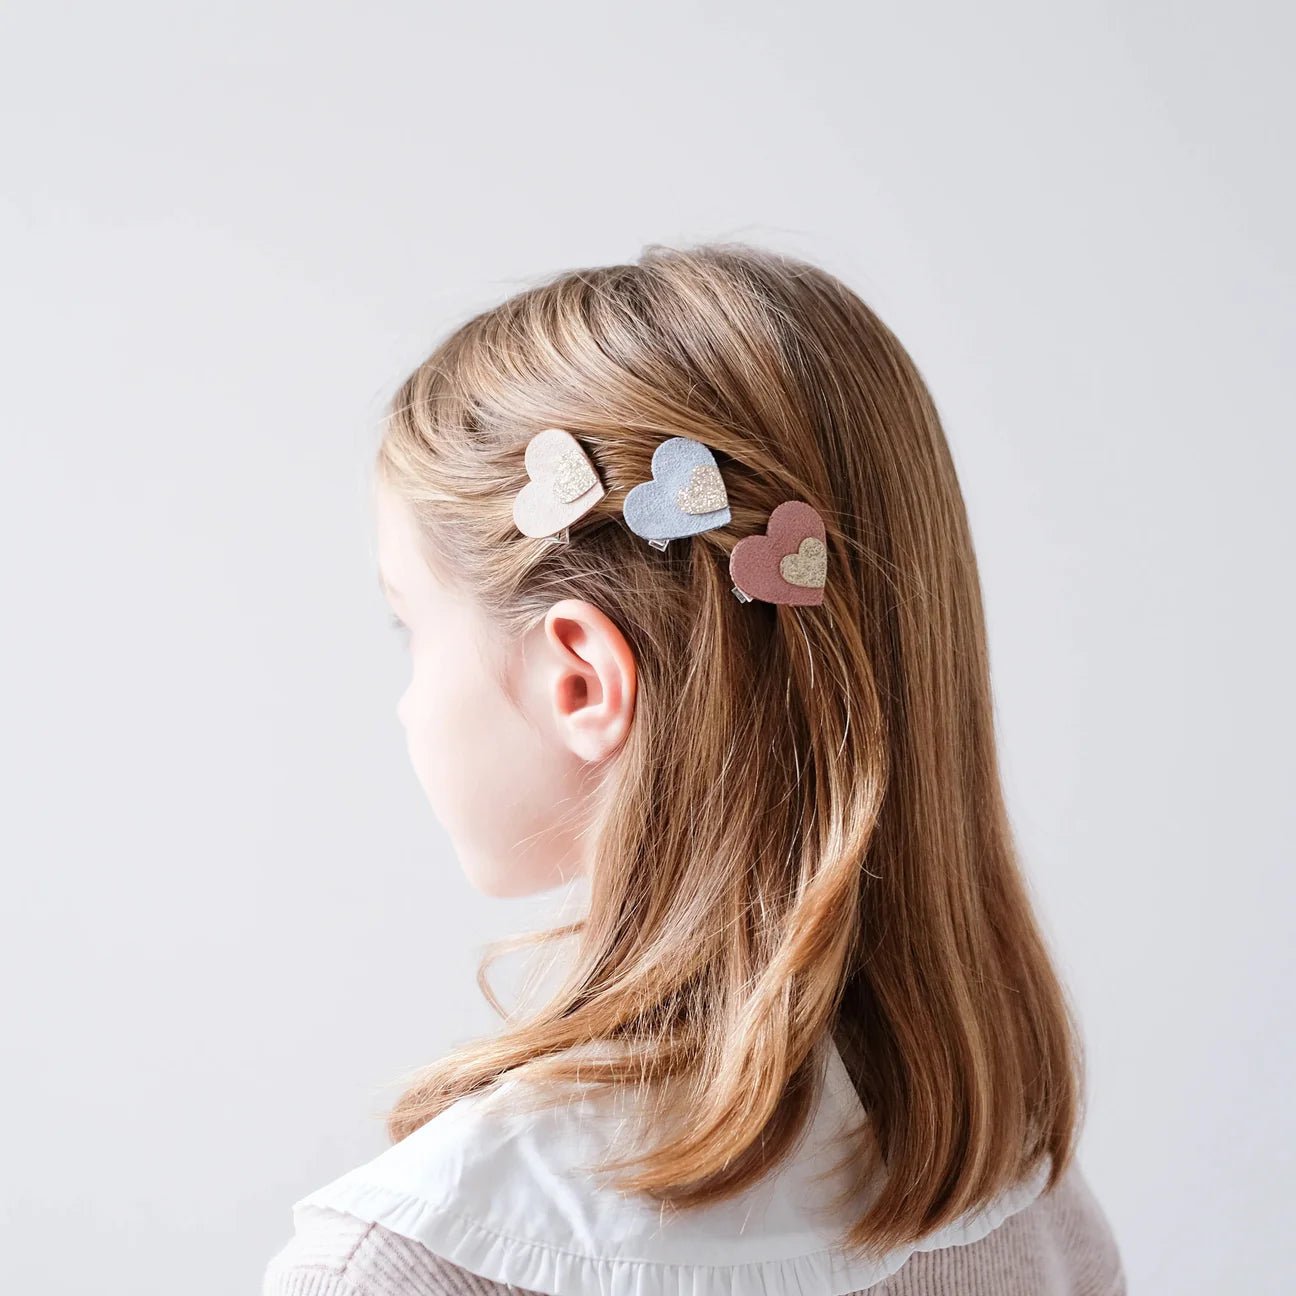 Butterscotch Heart Clips find Stylish Fashion for Little People- at Little Foxx Concept Store